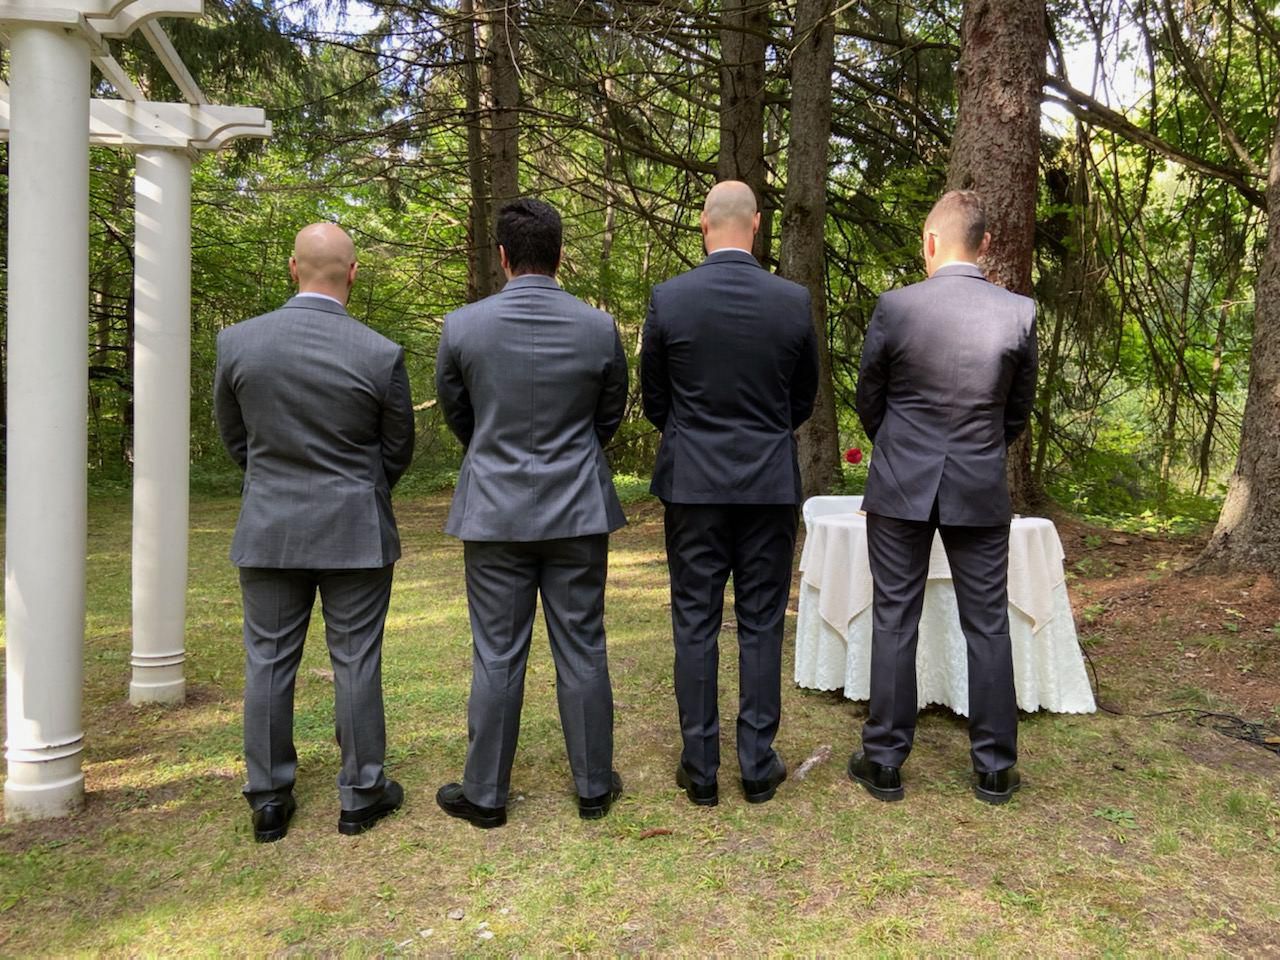 Best friend got married on the weekend. We turned around while the bride walked down.... now it looks like we're all peeing